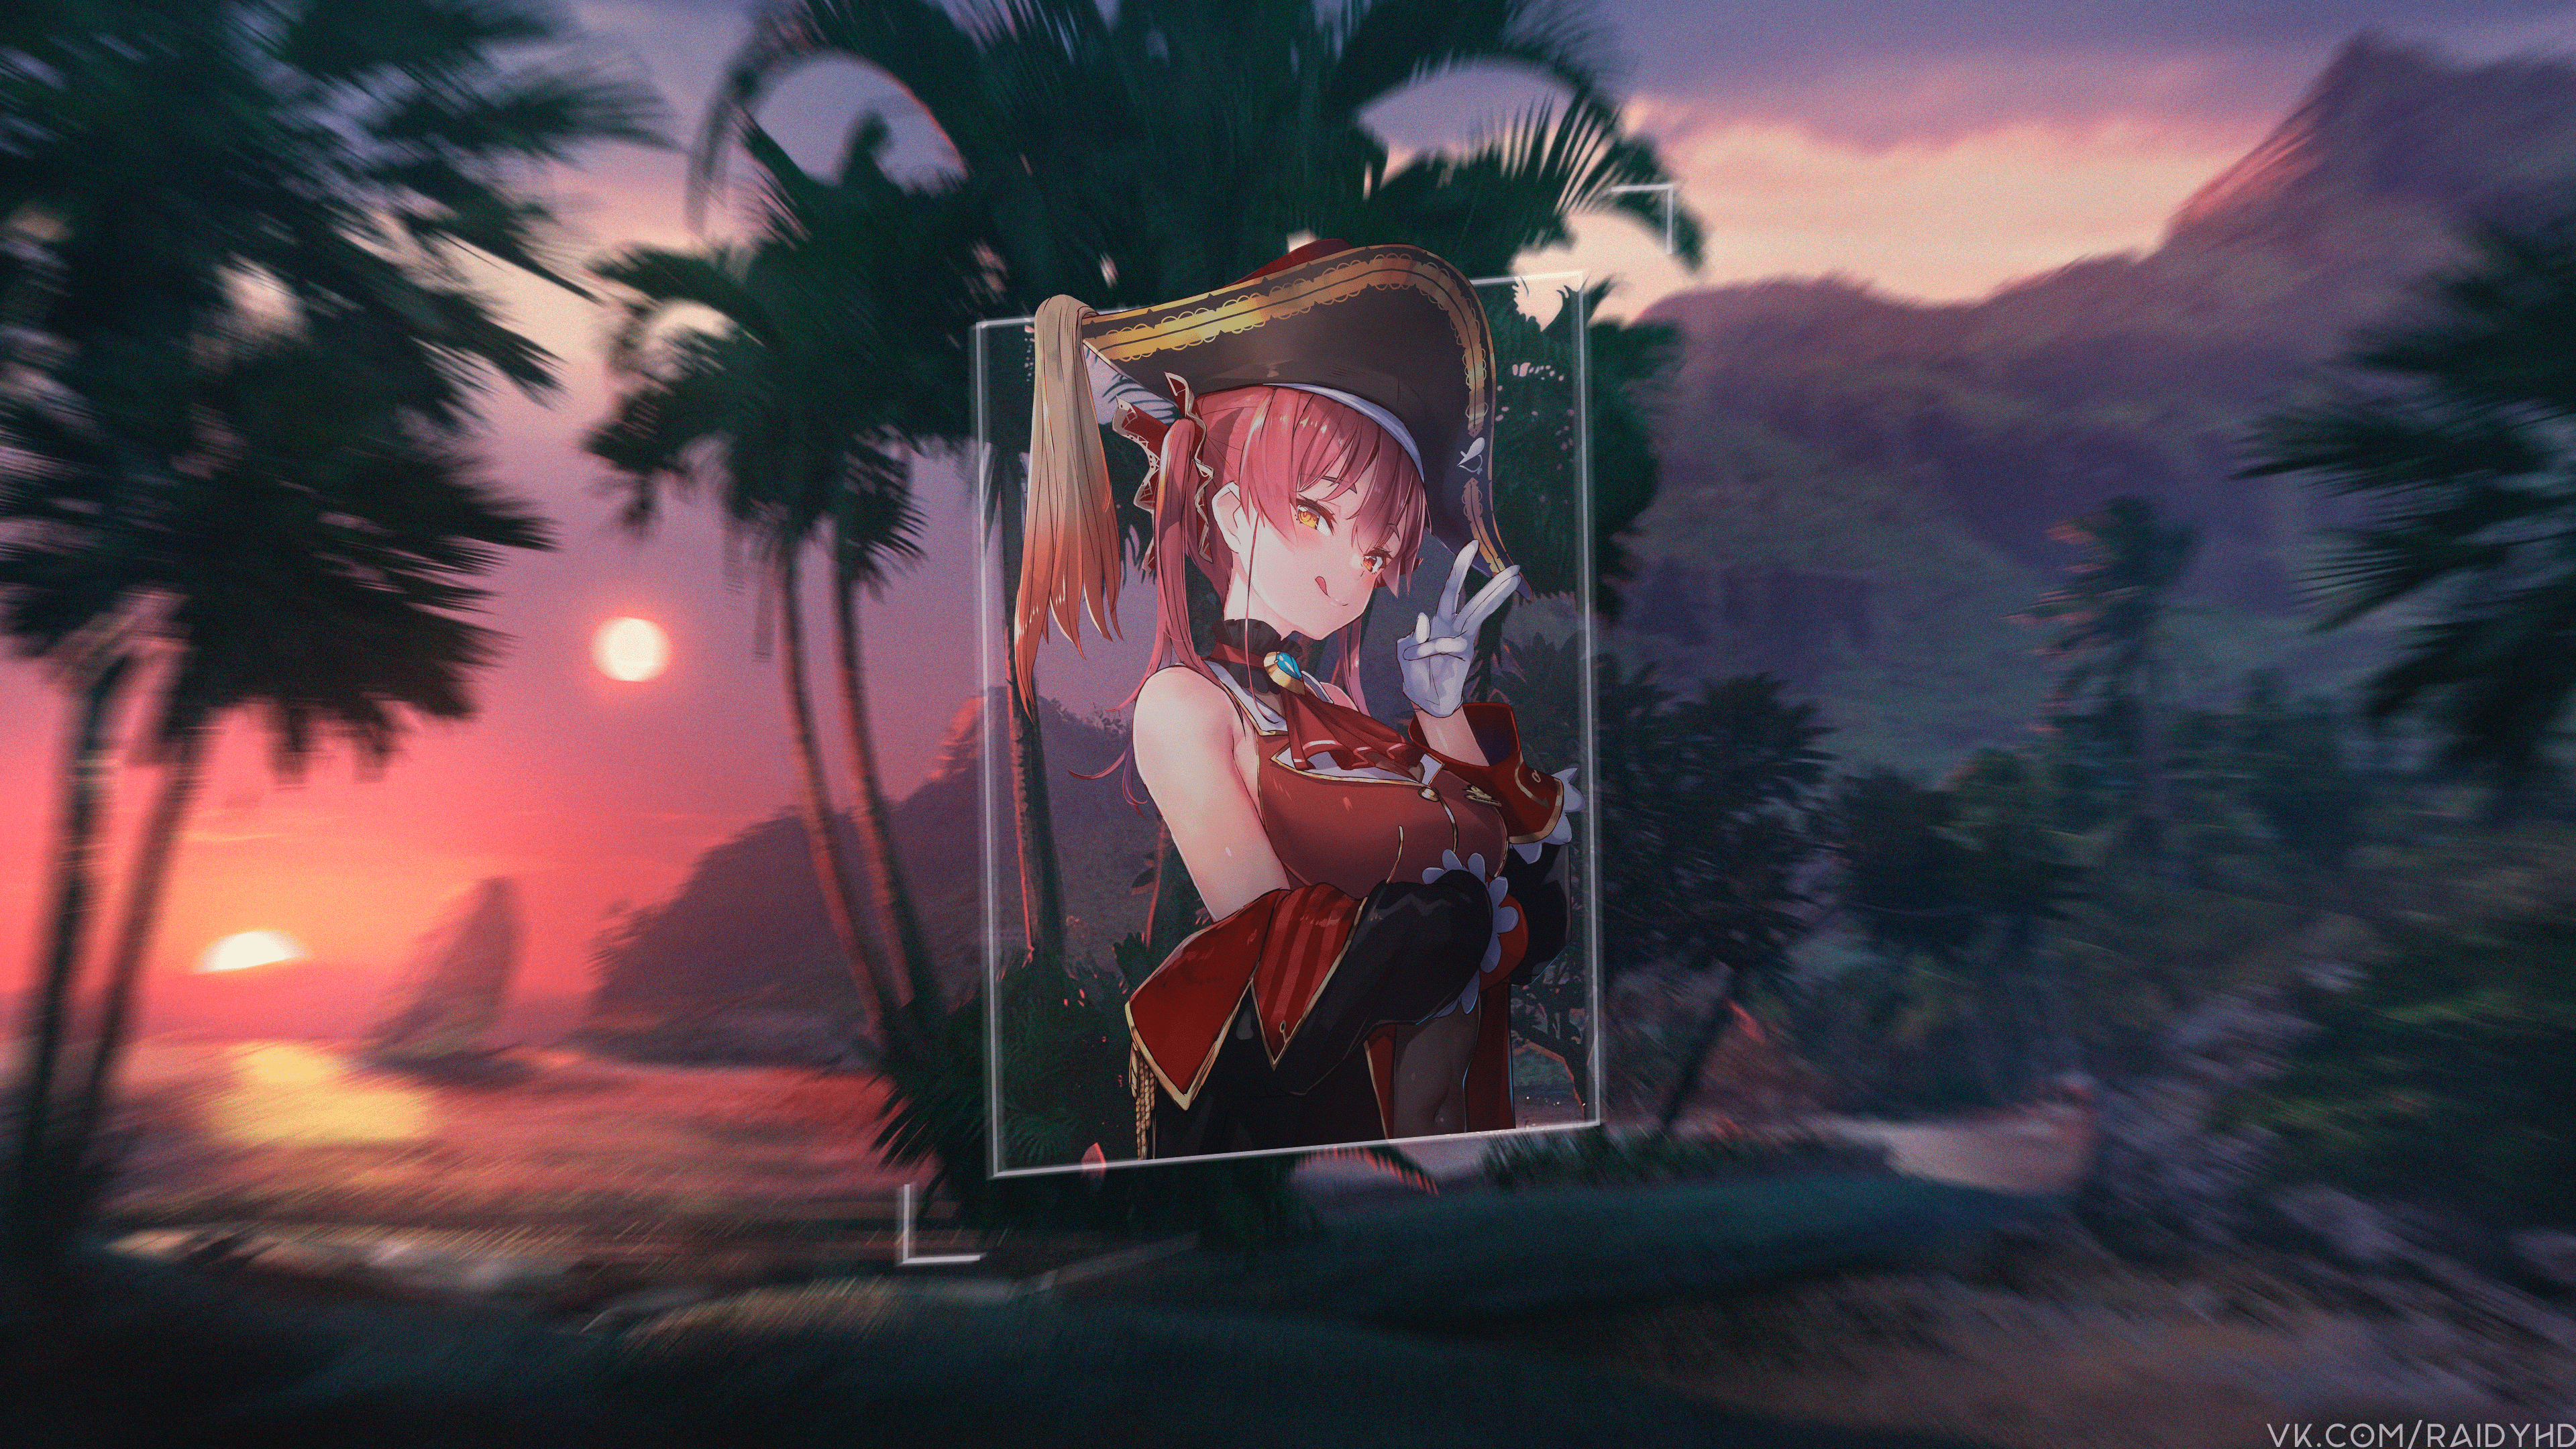 Anime 3840x2160 anime anime girls picture-in-picture Houshou Marine Hololive Virtual Youtuber pirate hat heterochromia watermarked palm trees redhead tongue out